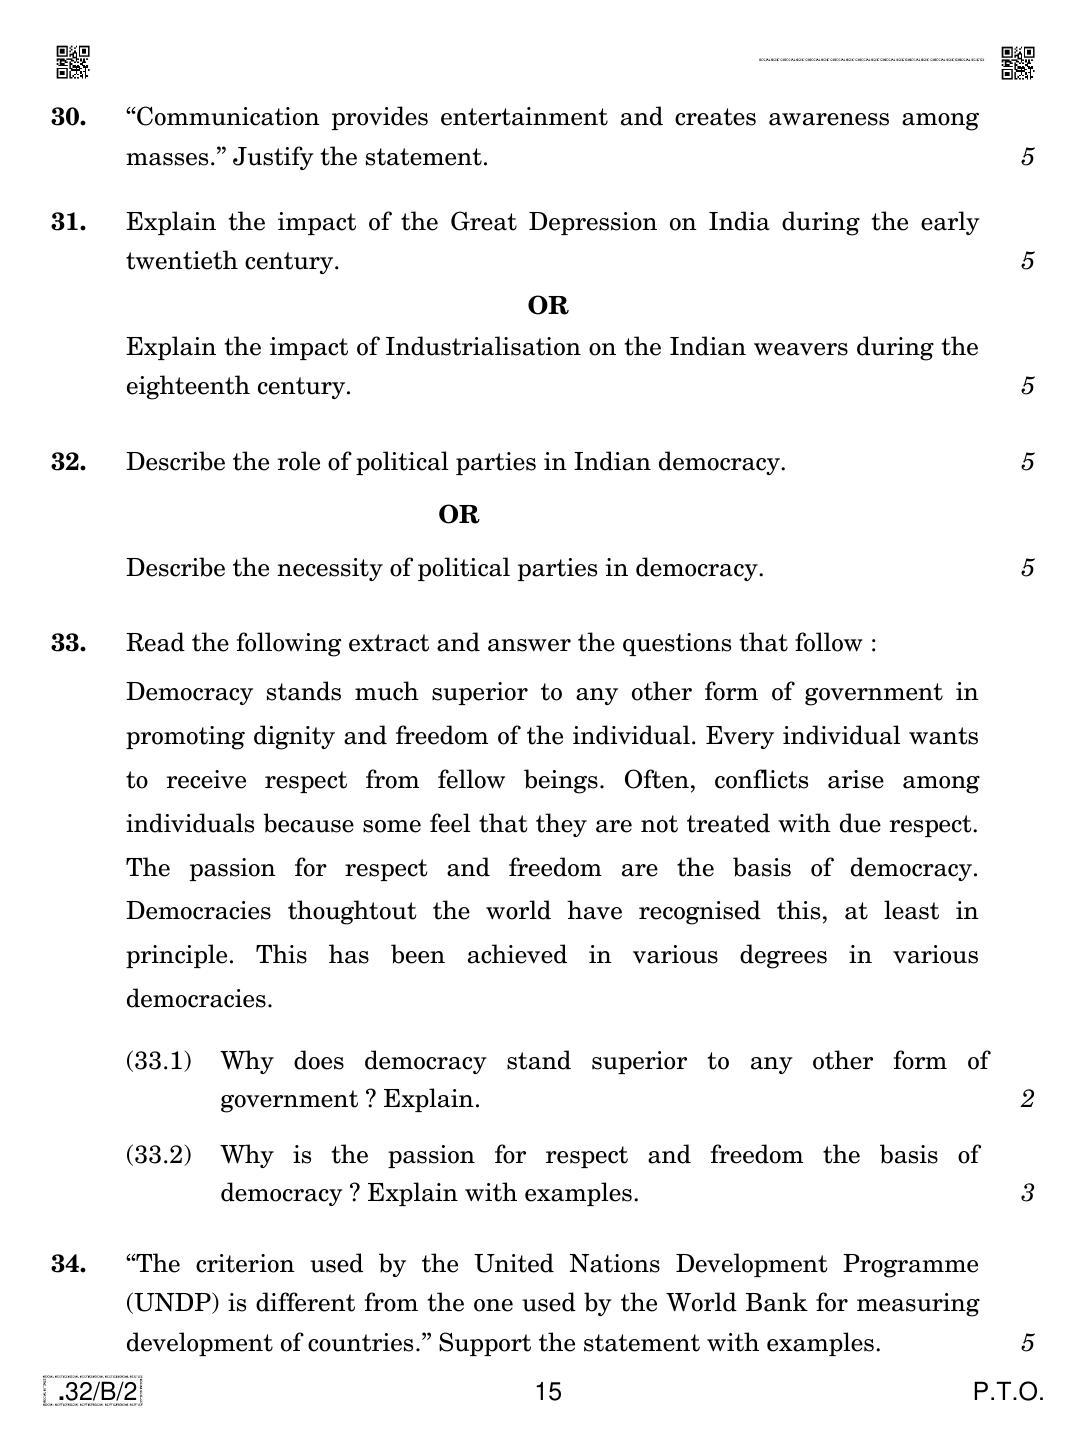 CBSE Class 10 32-C-2 Social Science 2020 Compartment Question Paper - Page 15